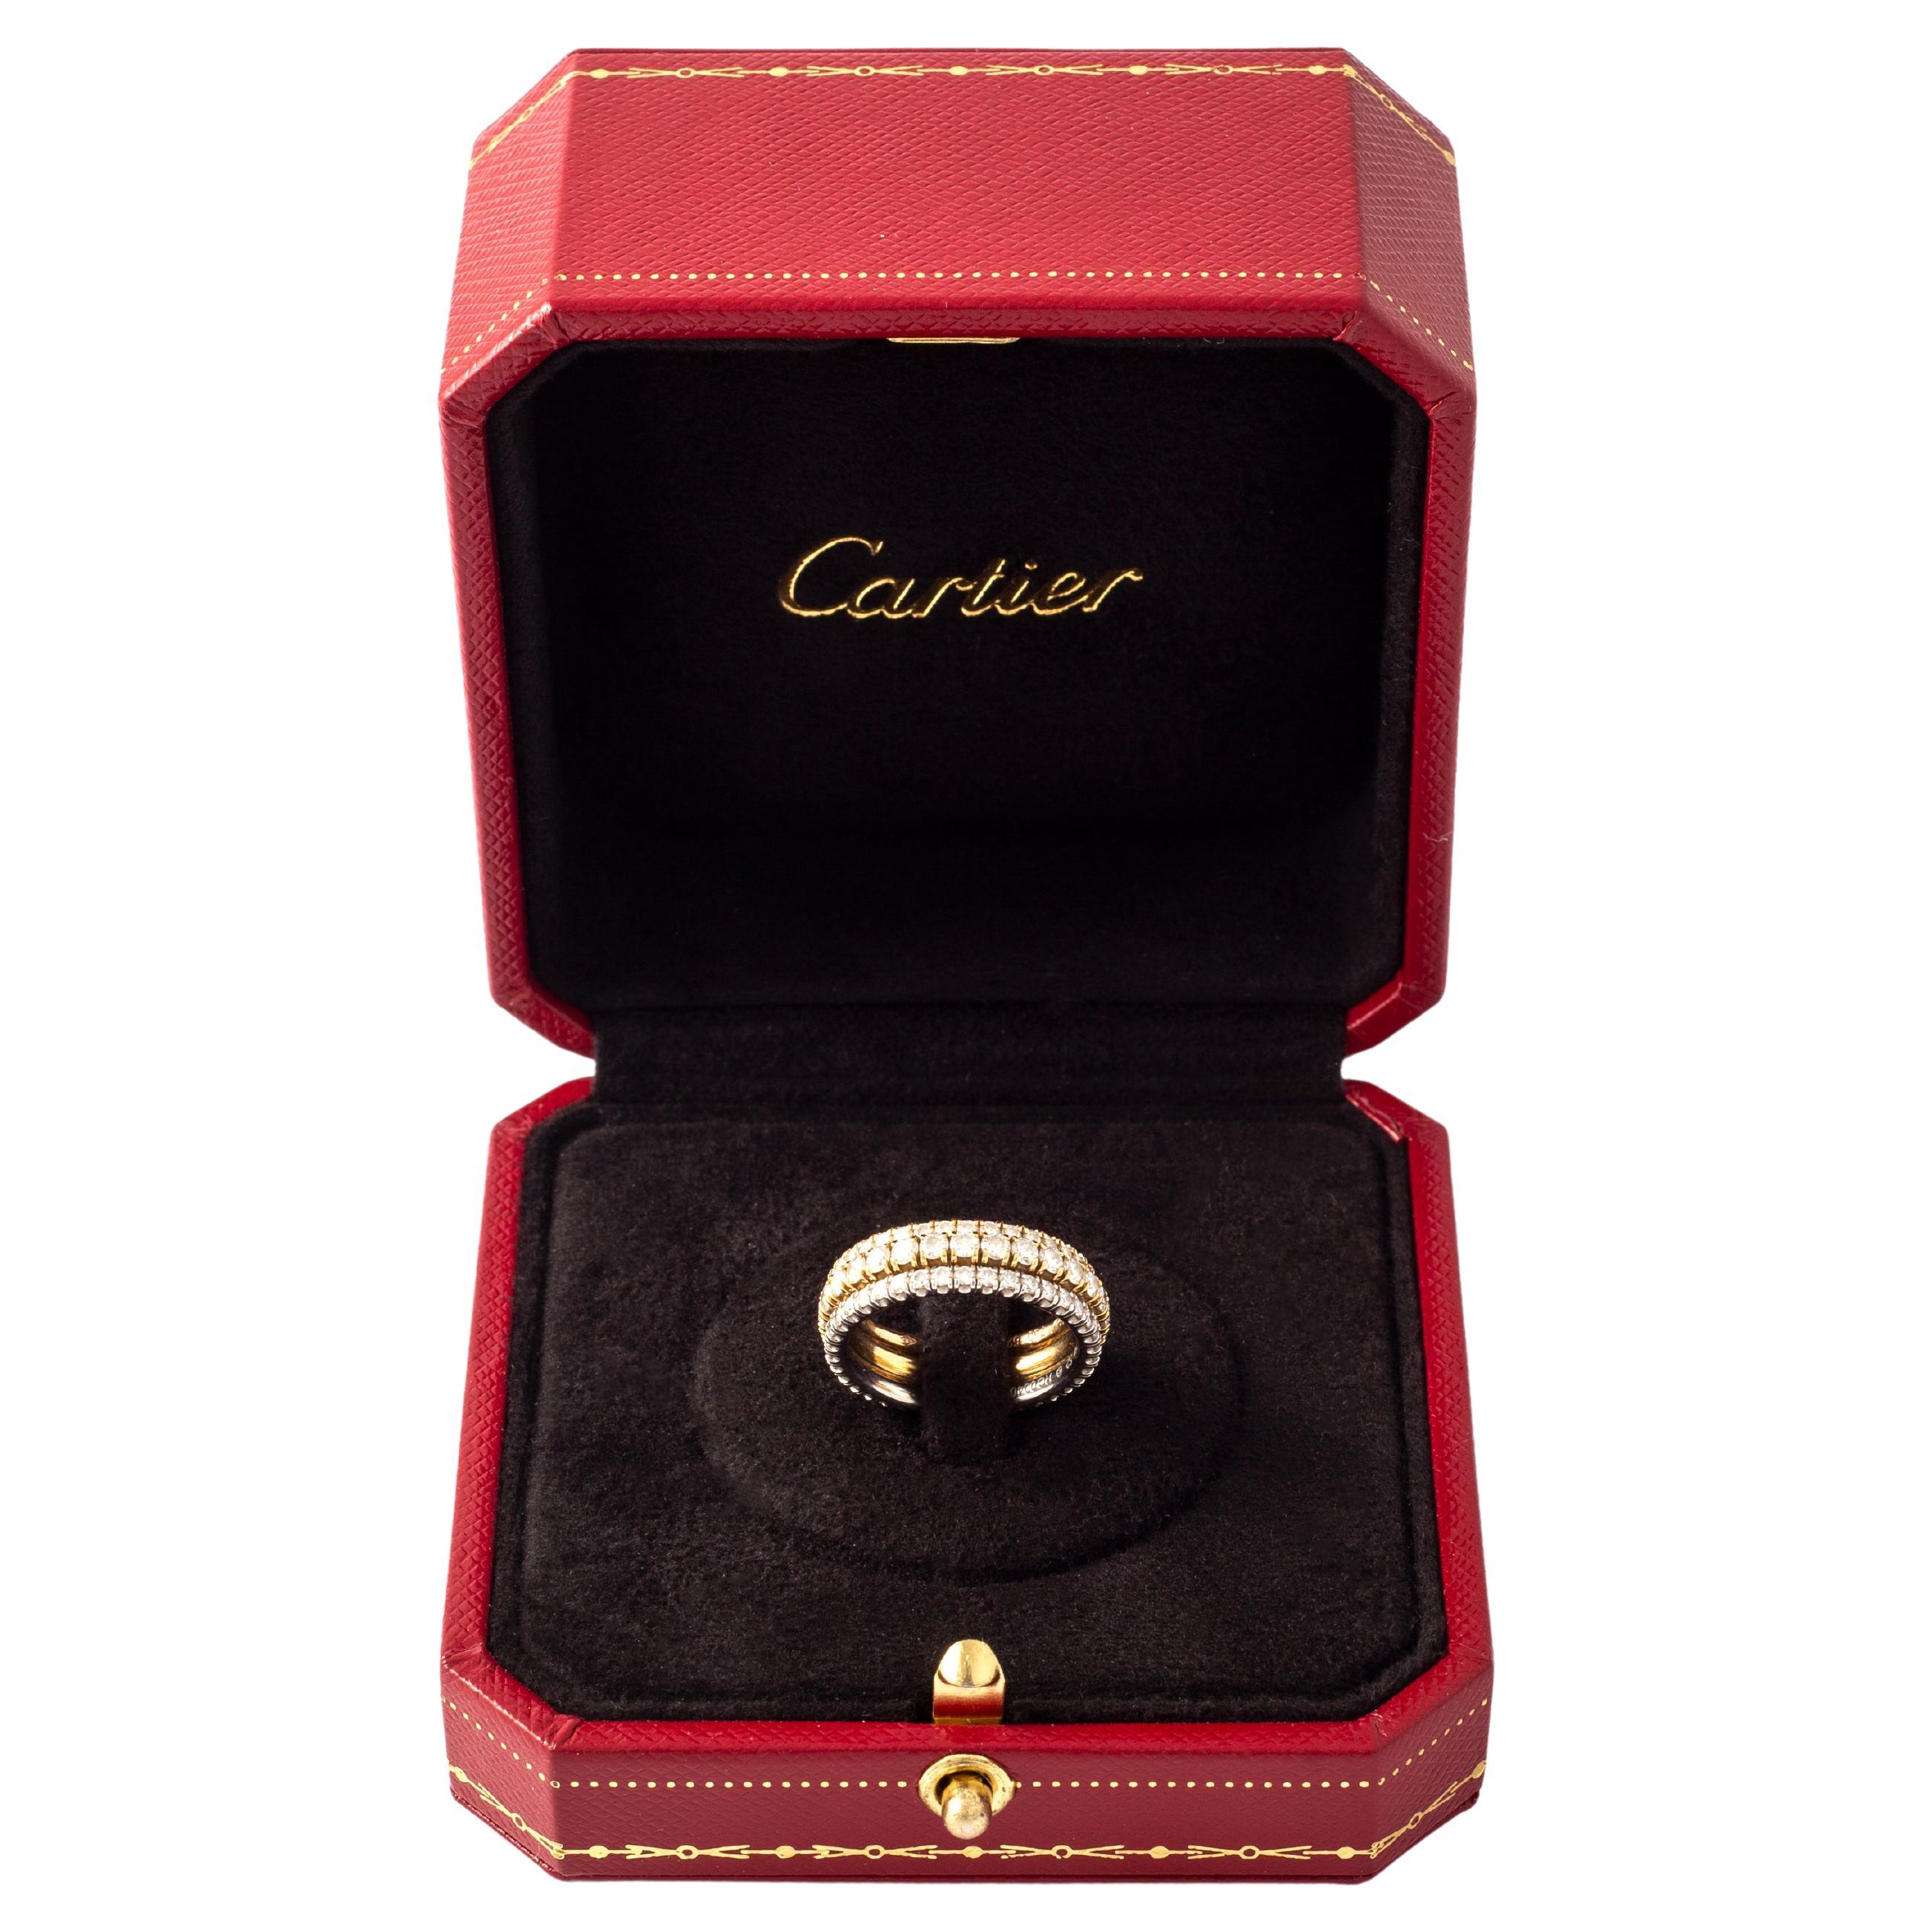 Cartier Diamond Rings For Sale